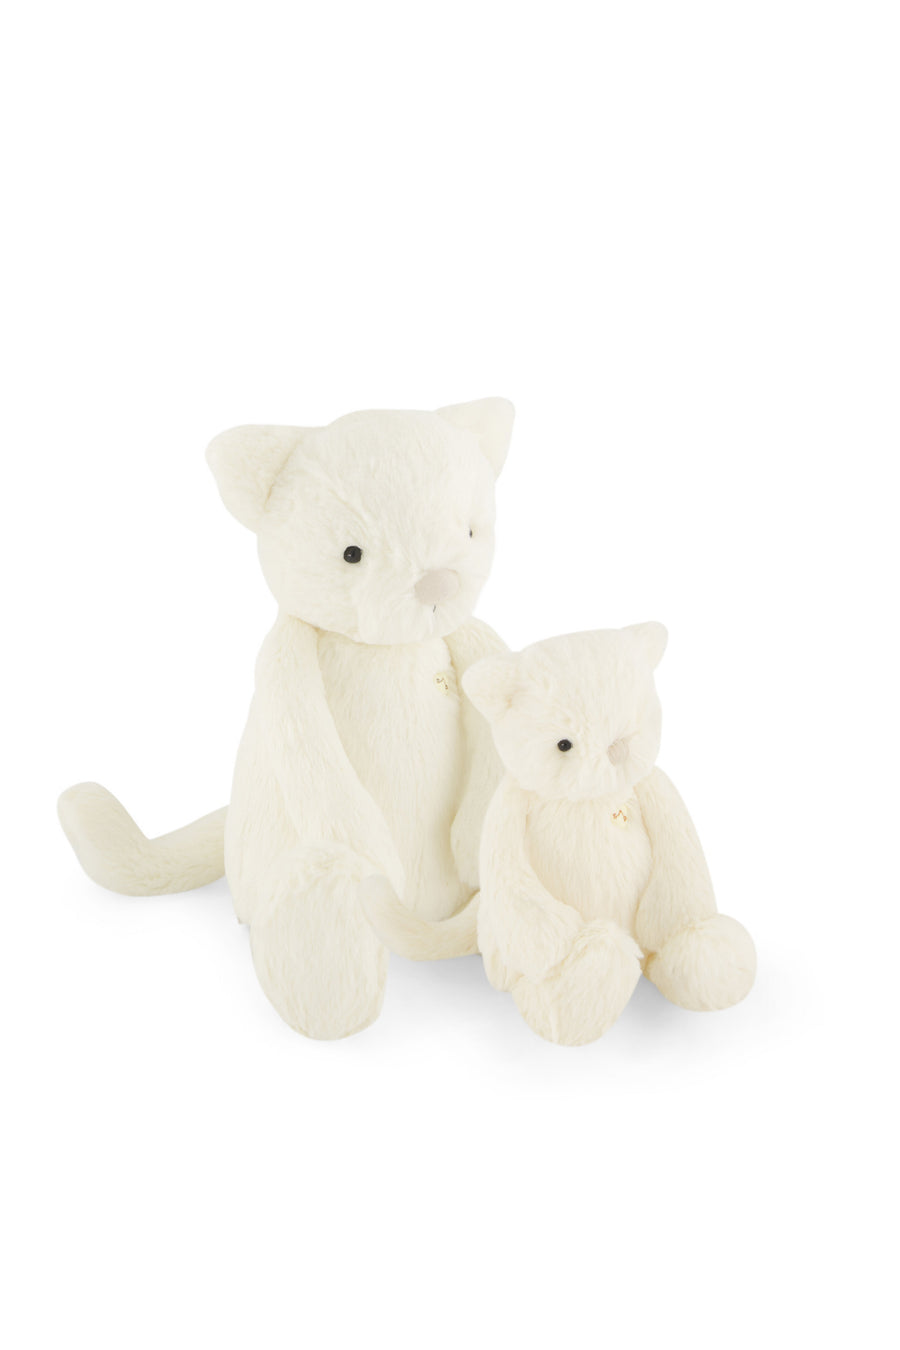 Snuggle Bunnies - Elsie the Kitty - Marshmallow Childrens Toy from Jamie Kay USA